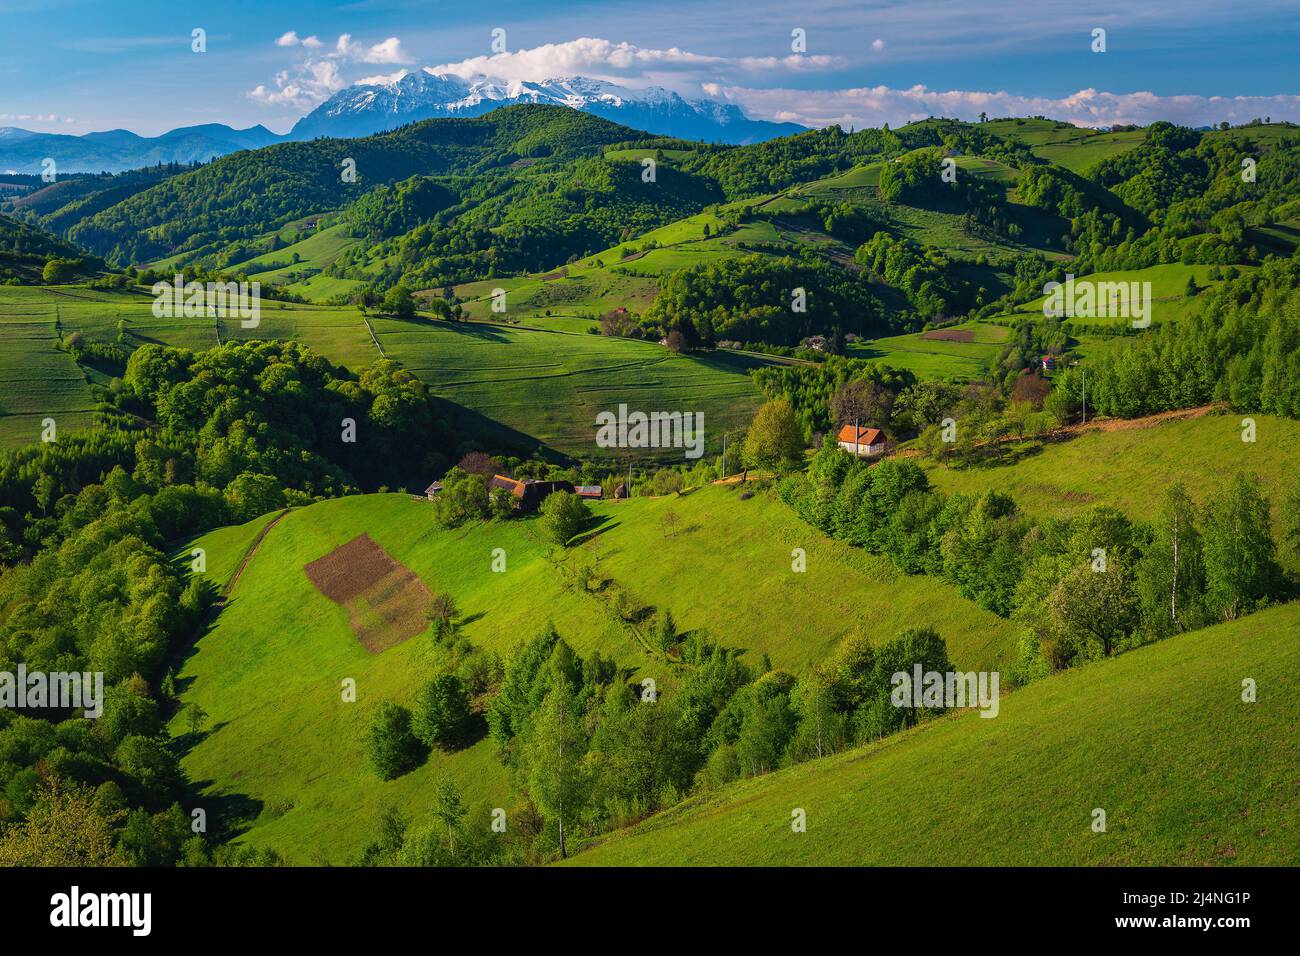 Amazing summer scenery with green meadows and agricultural farmlands on the slopes, high snowy mountains in background, Holbav village, Transylvania, Stock Photo